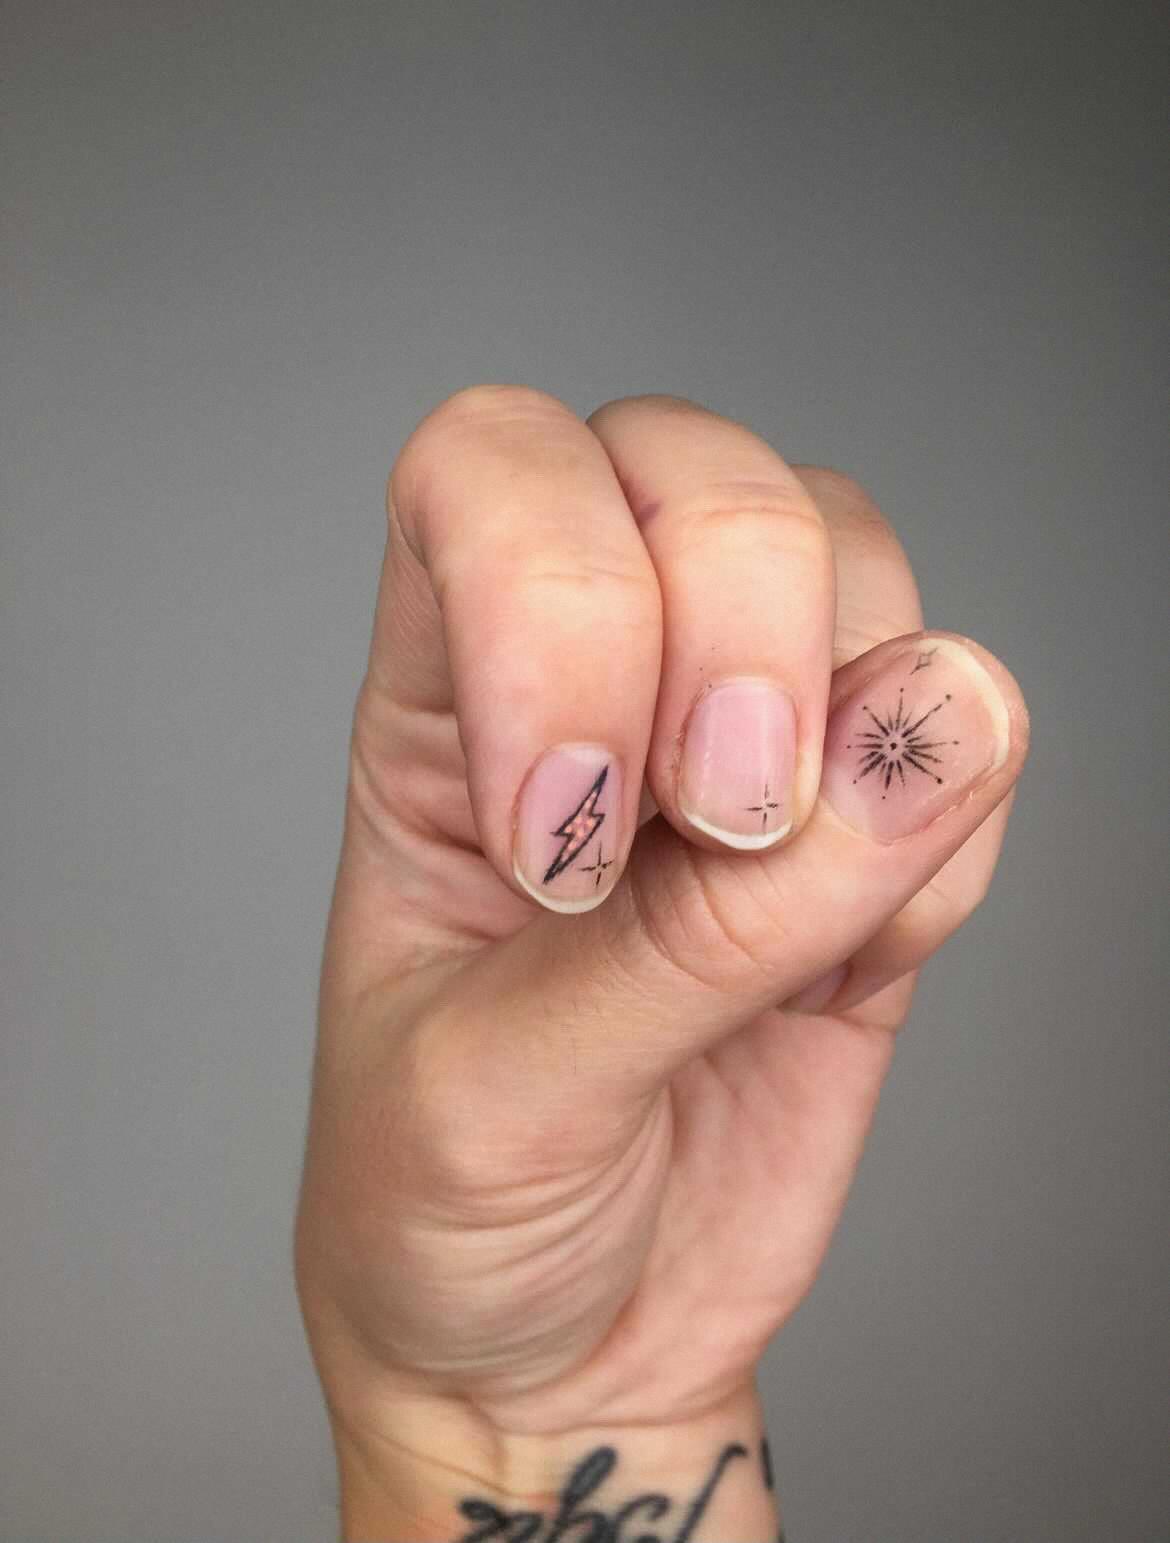 Rubbing No-No: How to Soothe That Irritating Tattoo Itch!